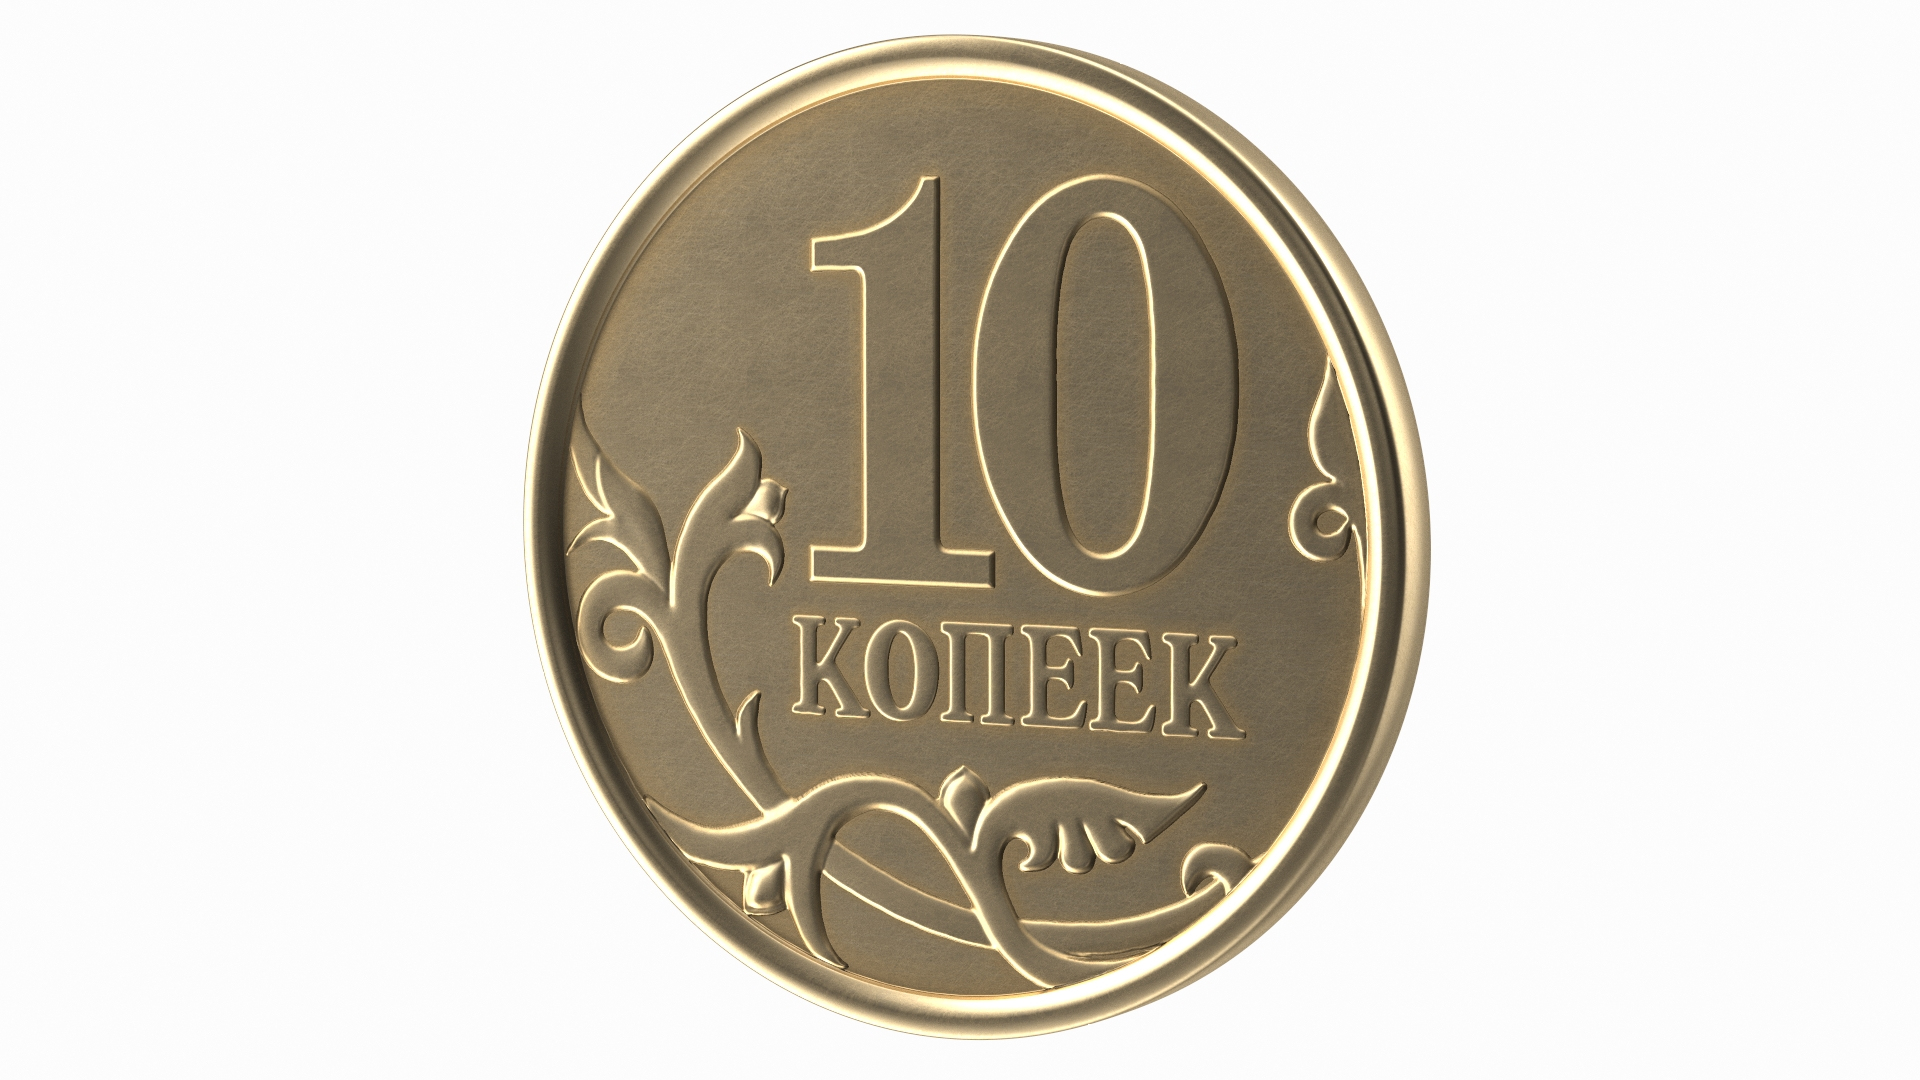 Russian Ruble Coins Collection 3 3D model https://p.turbosquid.com/ts-thumb/l4/g7CpGF/ly/russian_10_kopek_coin_360/jpg/1666775216/1920x1080/turn_fit_q99/13c003693e628ad5954c07d5cd7d3c33d940db94/russian_10_kopek_coin_360-1.jpg